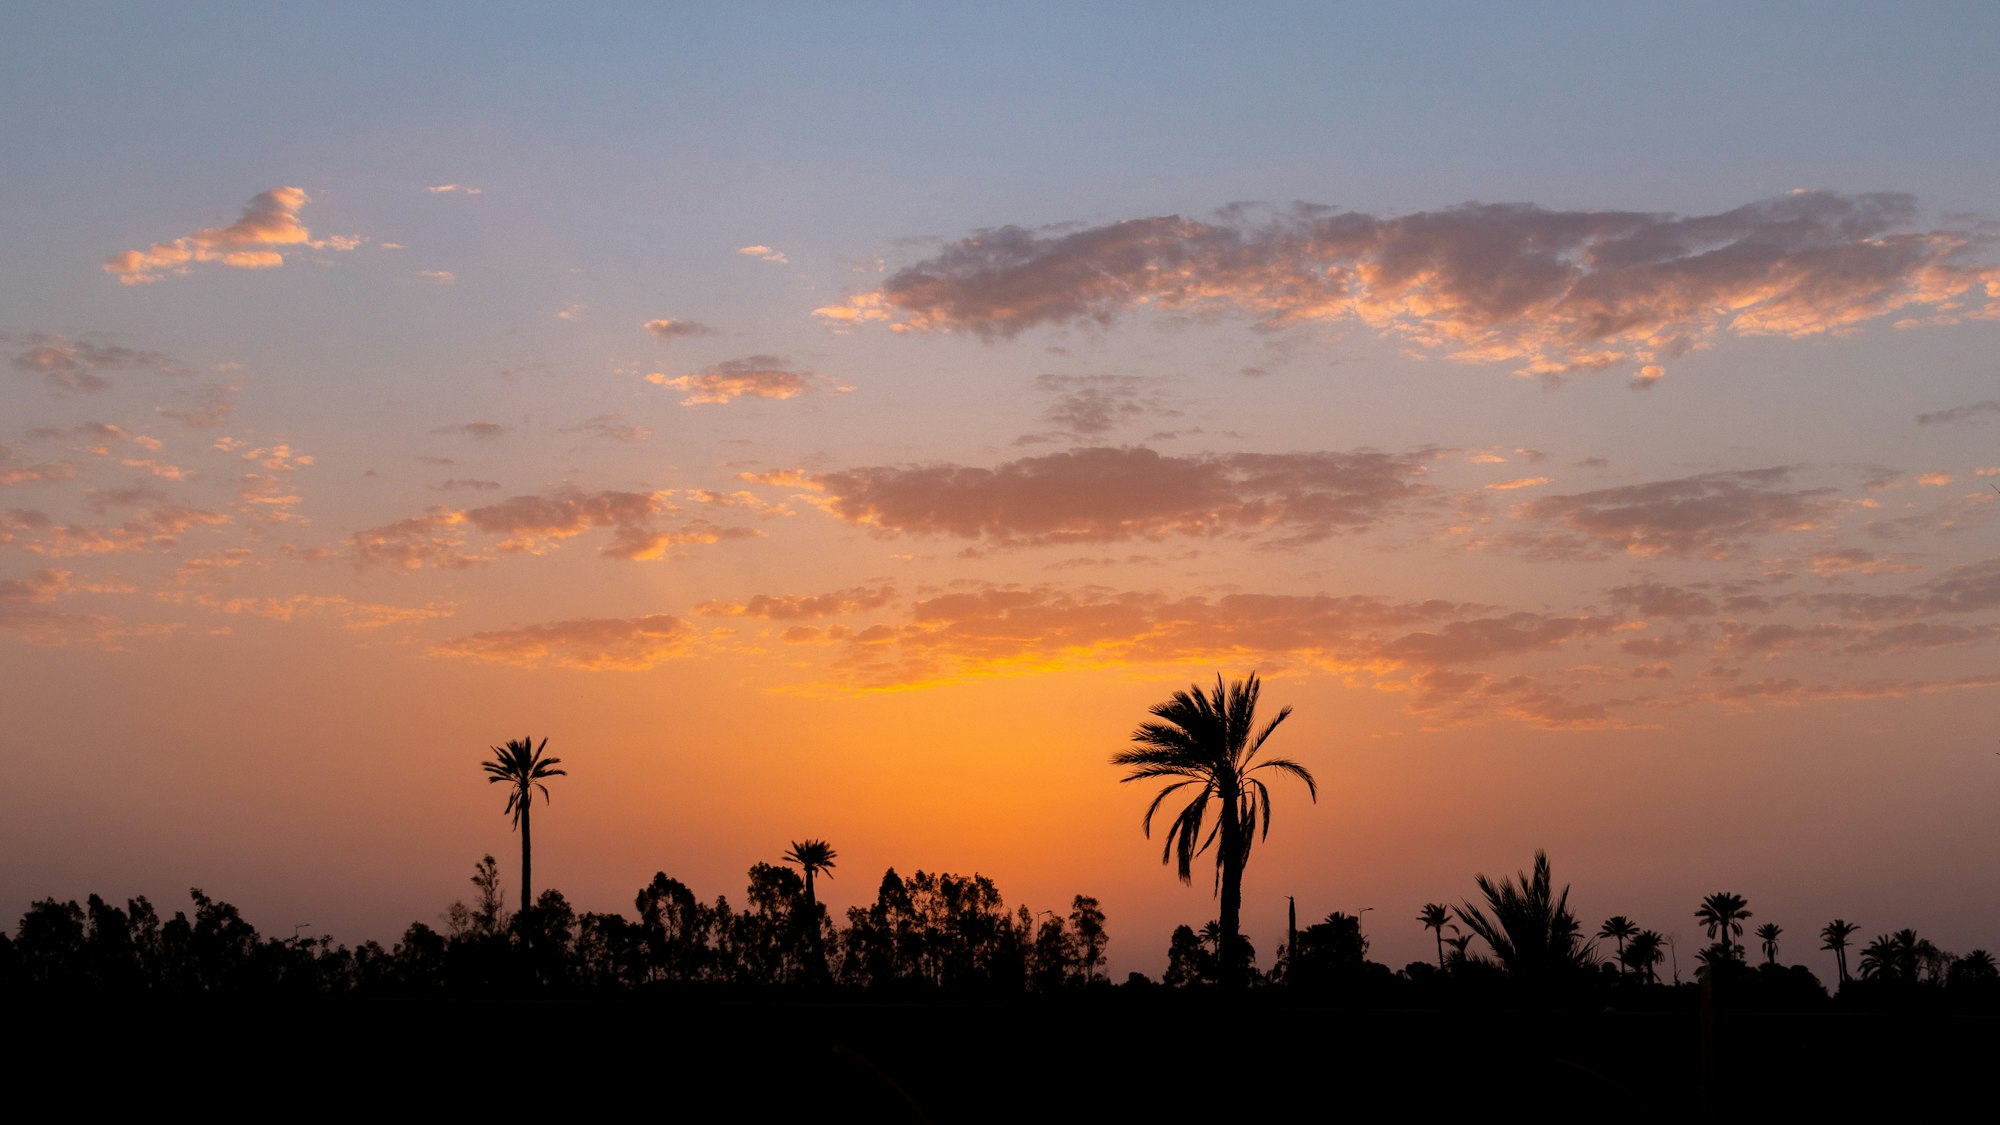 After a year of hard work, I decided to escape for a few weeks away from Paris and it is in Morocco that I stay. After a day in the streets of Marrakesh, around 08:00 PM, I see this beautiful sunset that I immortalize and that I share with you. A great wallpaper.